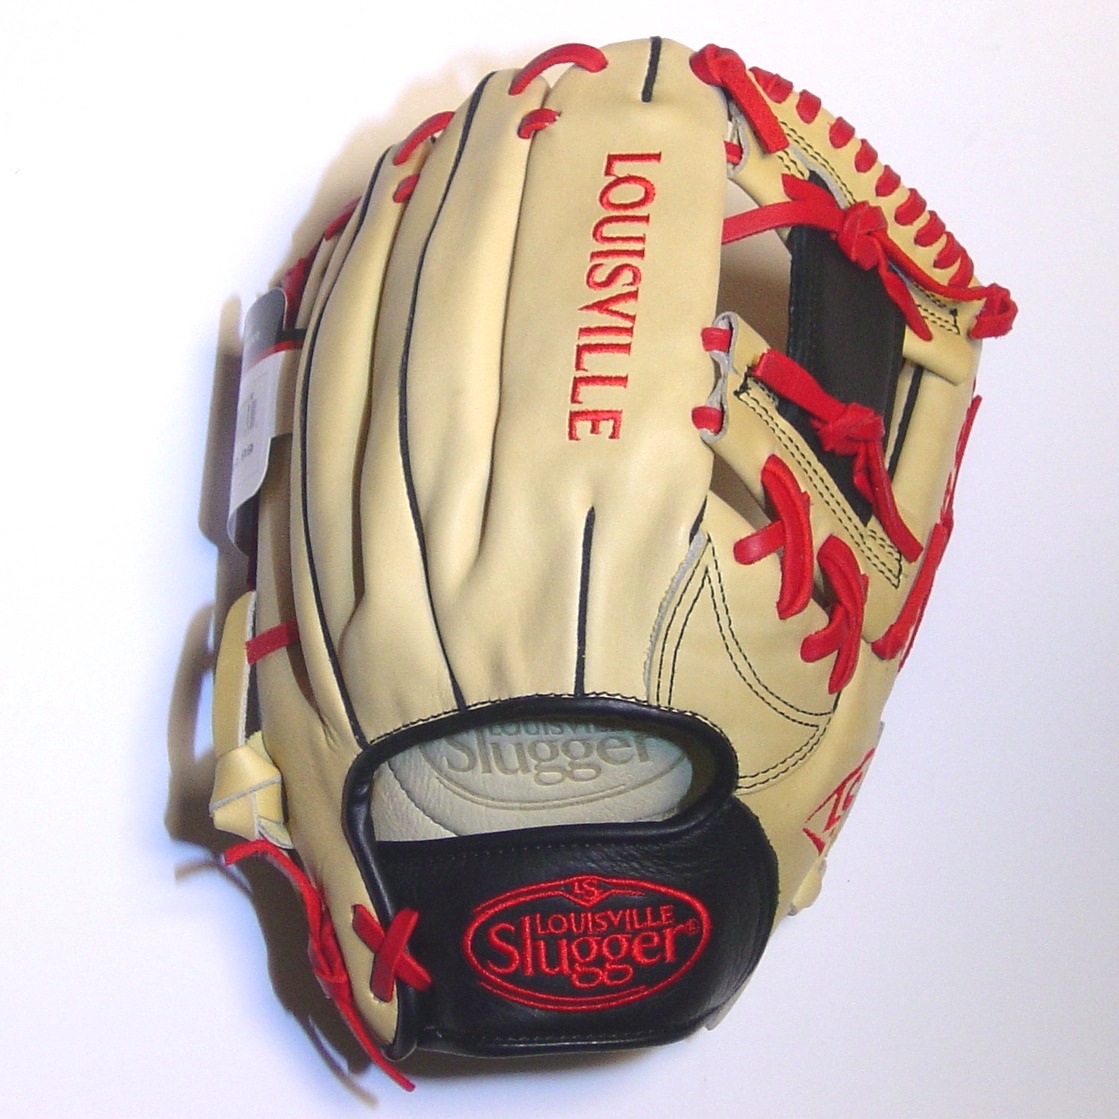 The Louisville Slugger Omaha Pro series brings together premium shell leather with softer linings for a substantial feel that is game-ready off the shelf. The unique, vintage leather gives each glove a personality of its own.